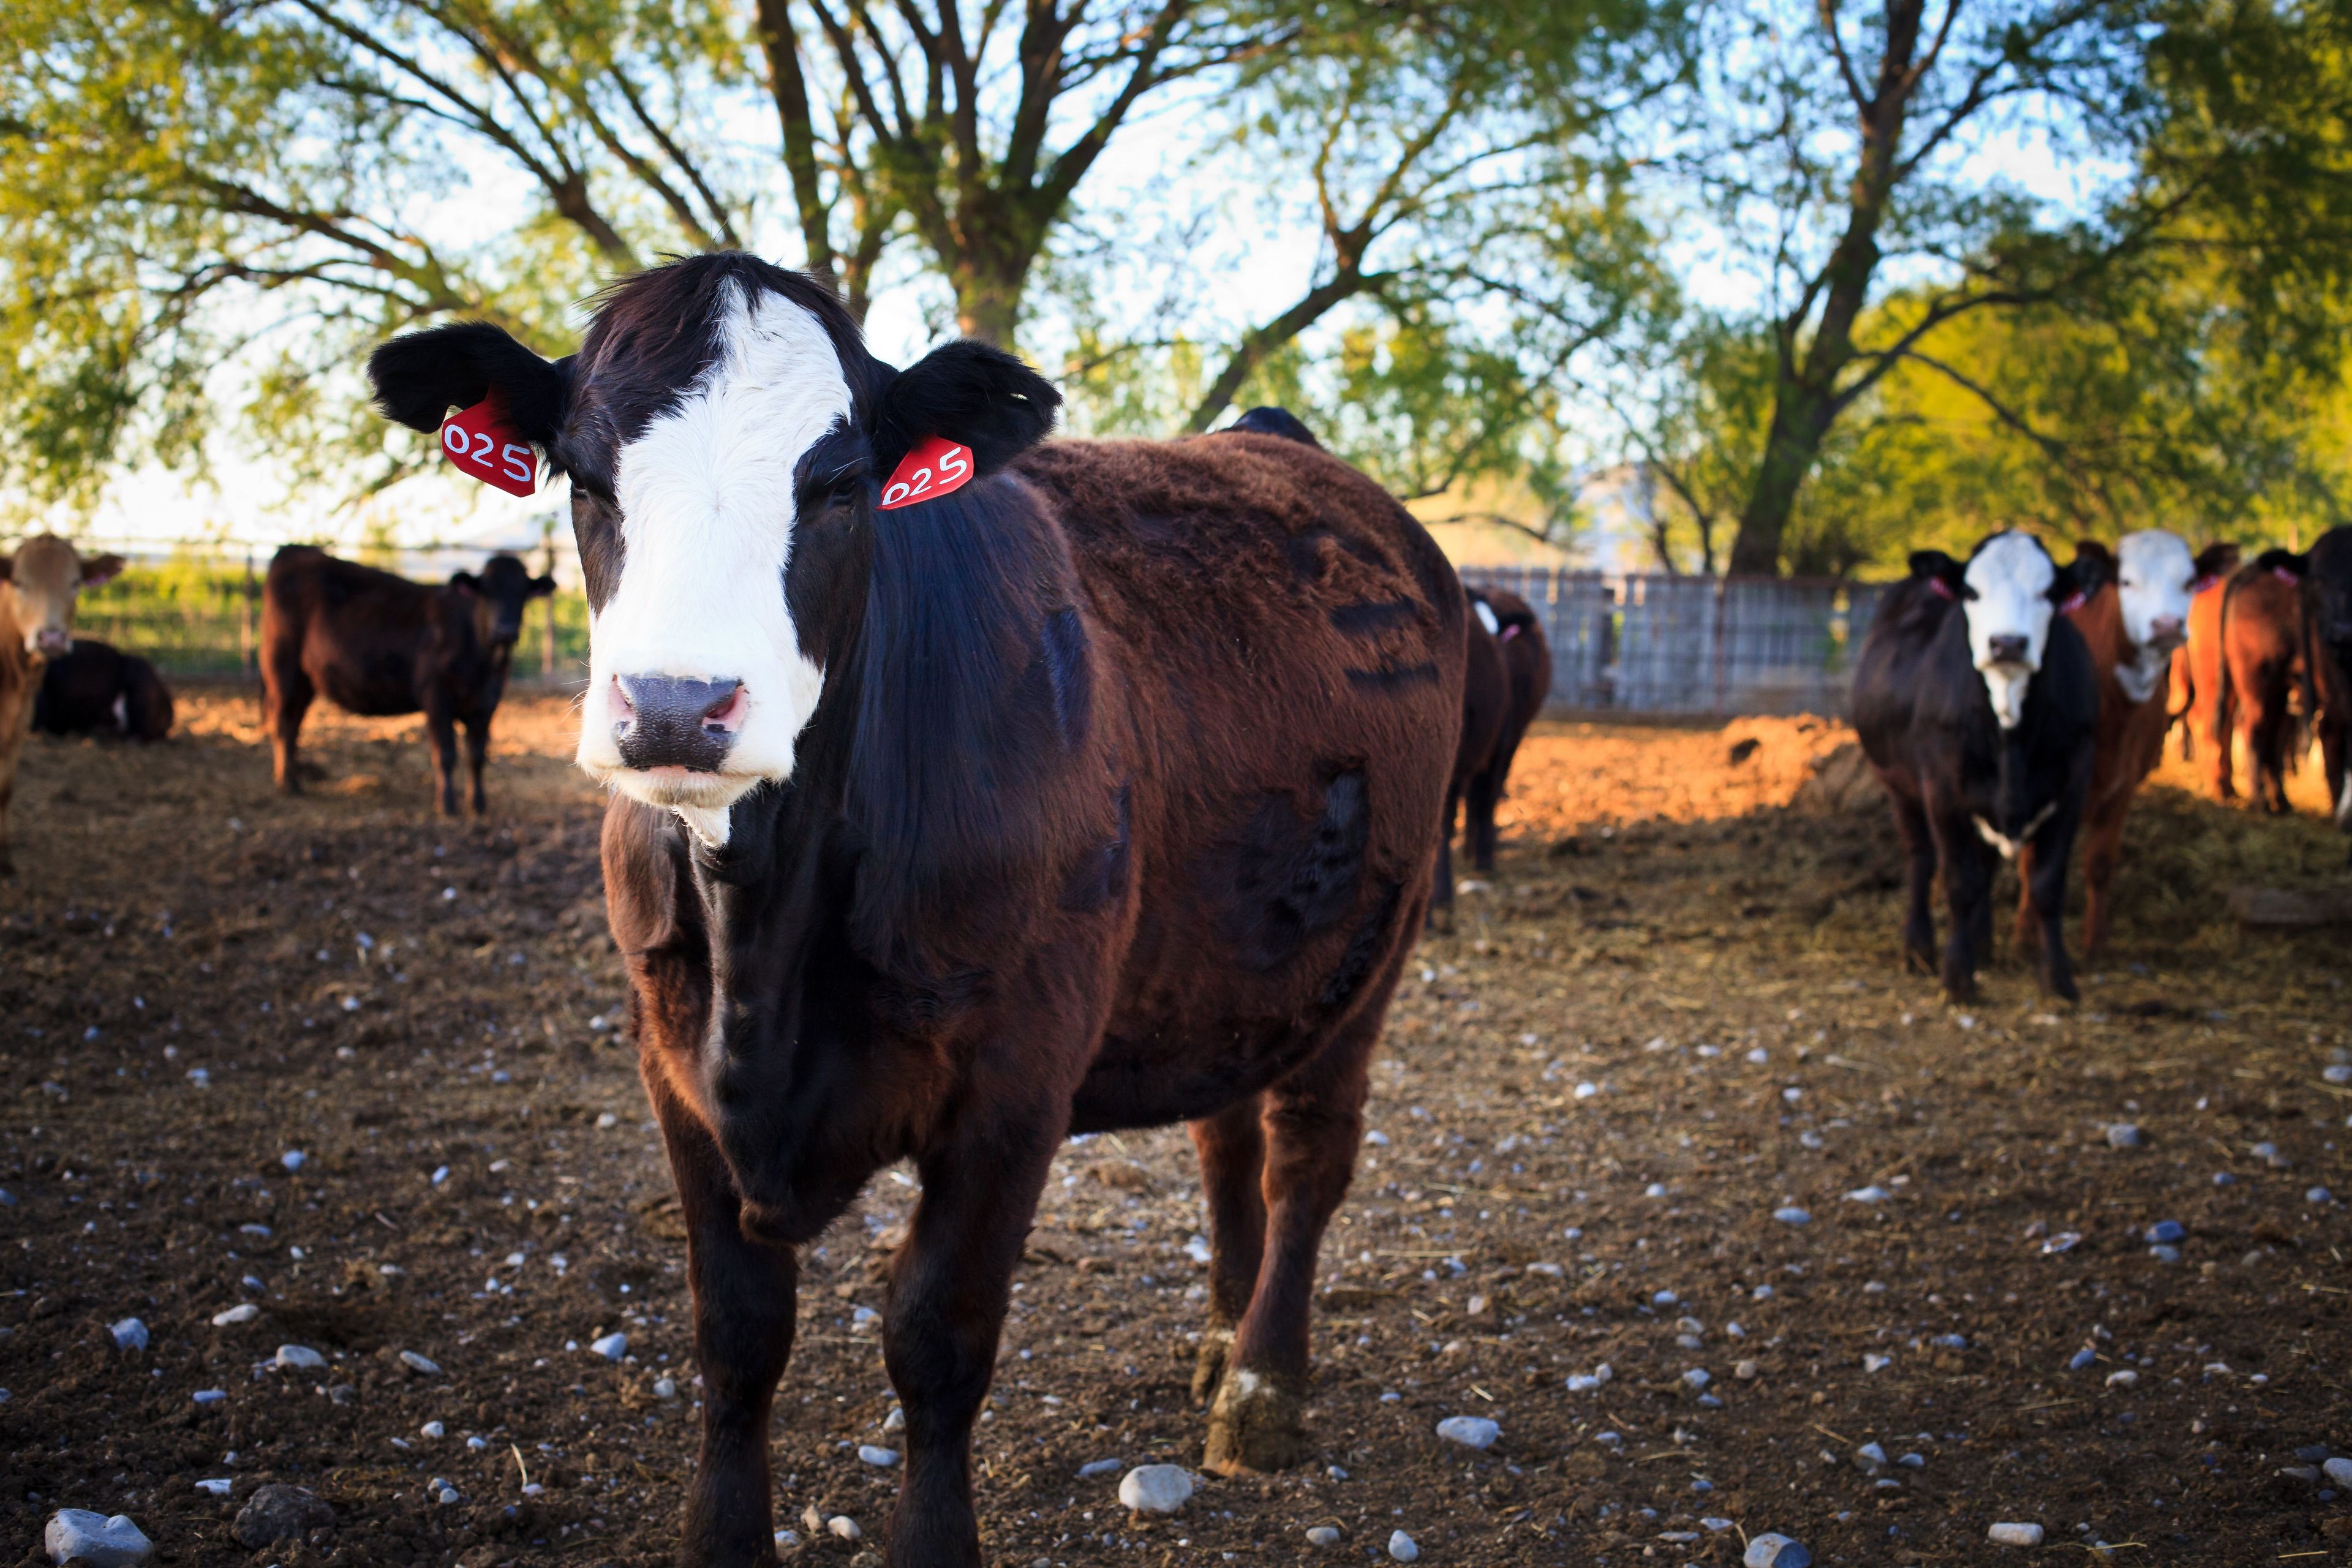 A portrait of a cow in a corral with other cattle.